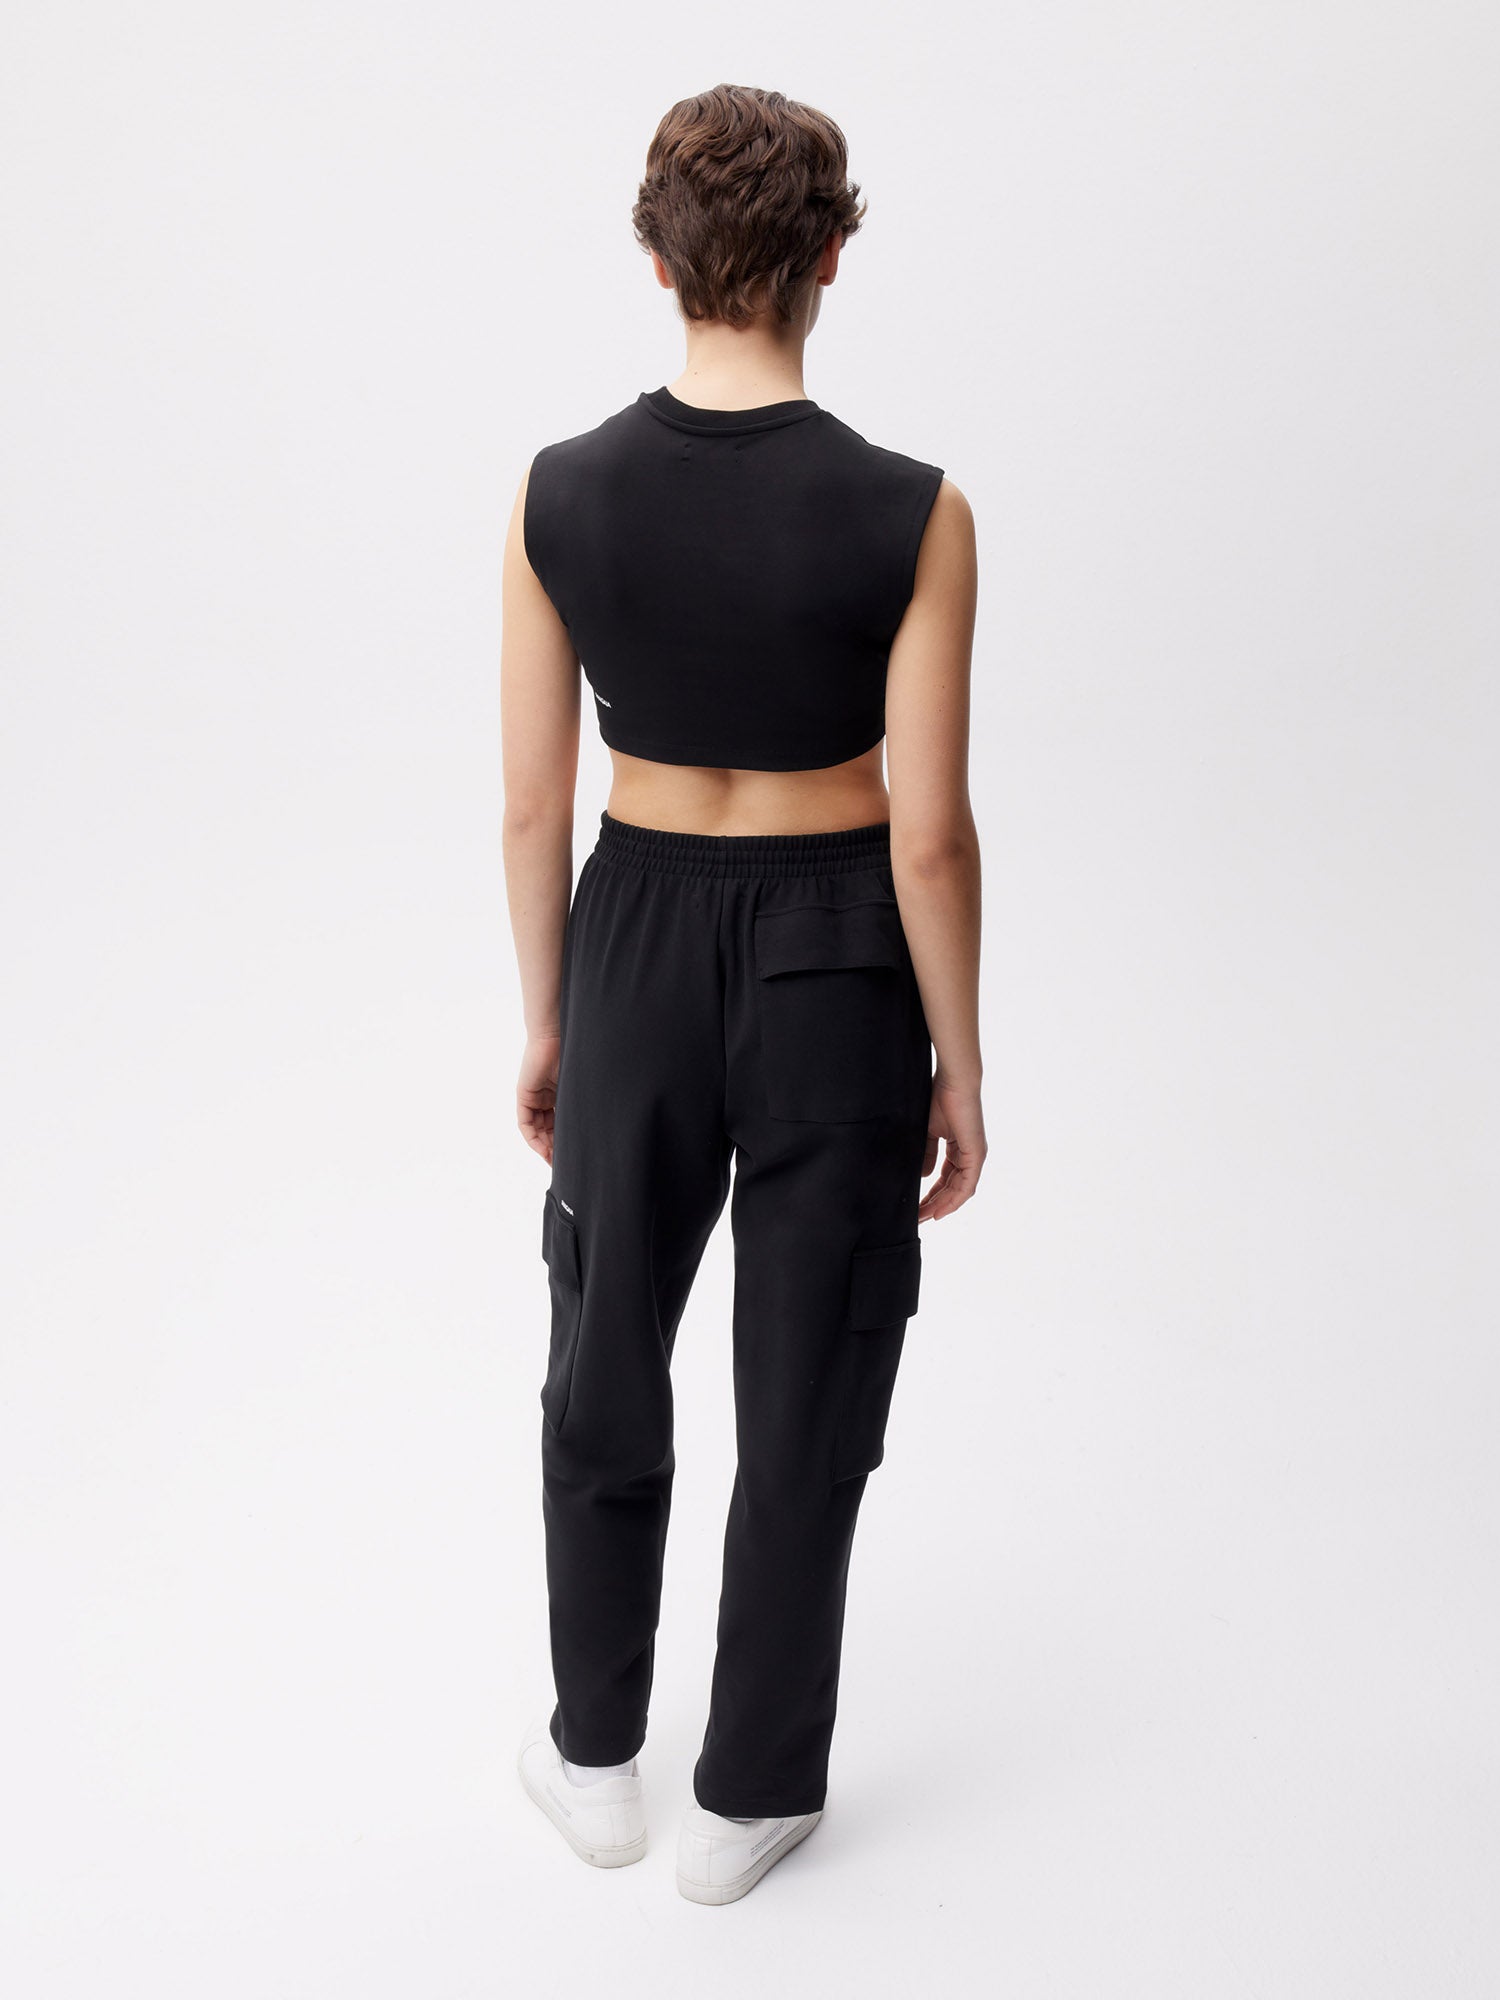 10 Ways to Style Carg0 Winter Track Pants for Ladies - The Kosha Journal